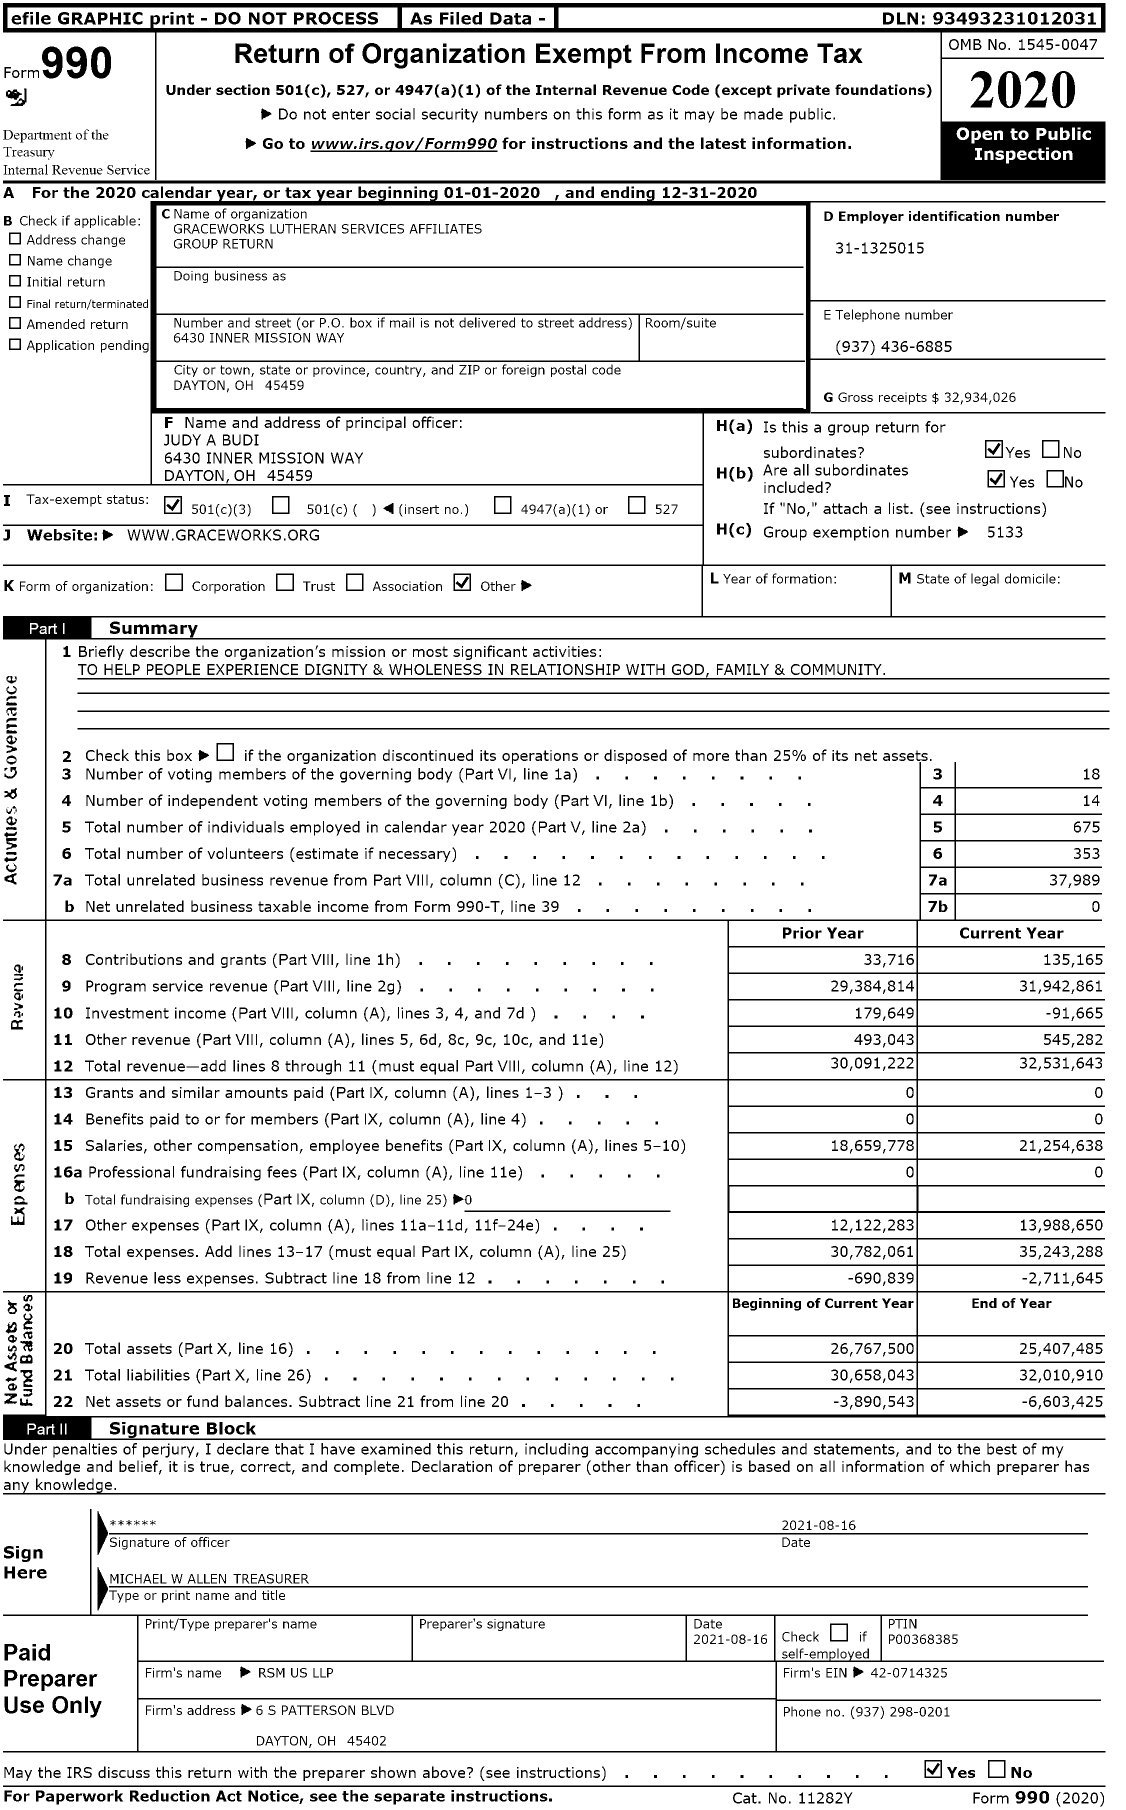 Image of first page of 2020 Form 990 for Graceworks Lutheran Services Affiliates Group Return